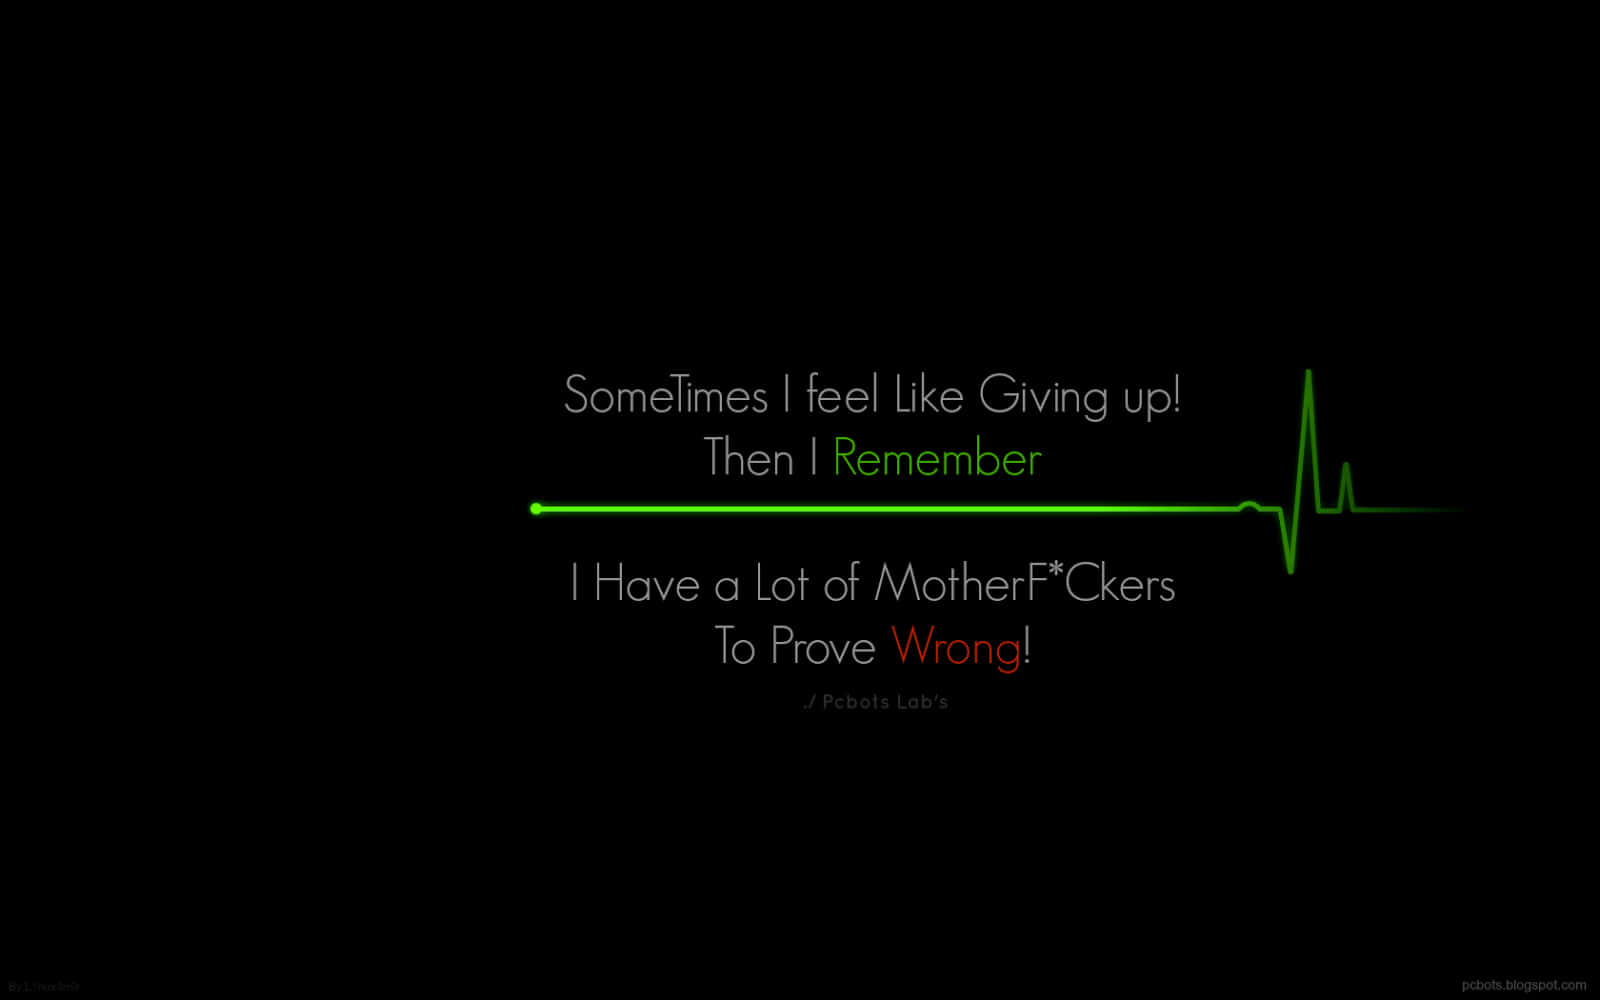 Sure Proving Wrong Quote Wallpaper Wallpaper